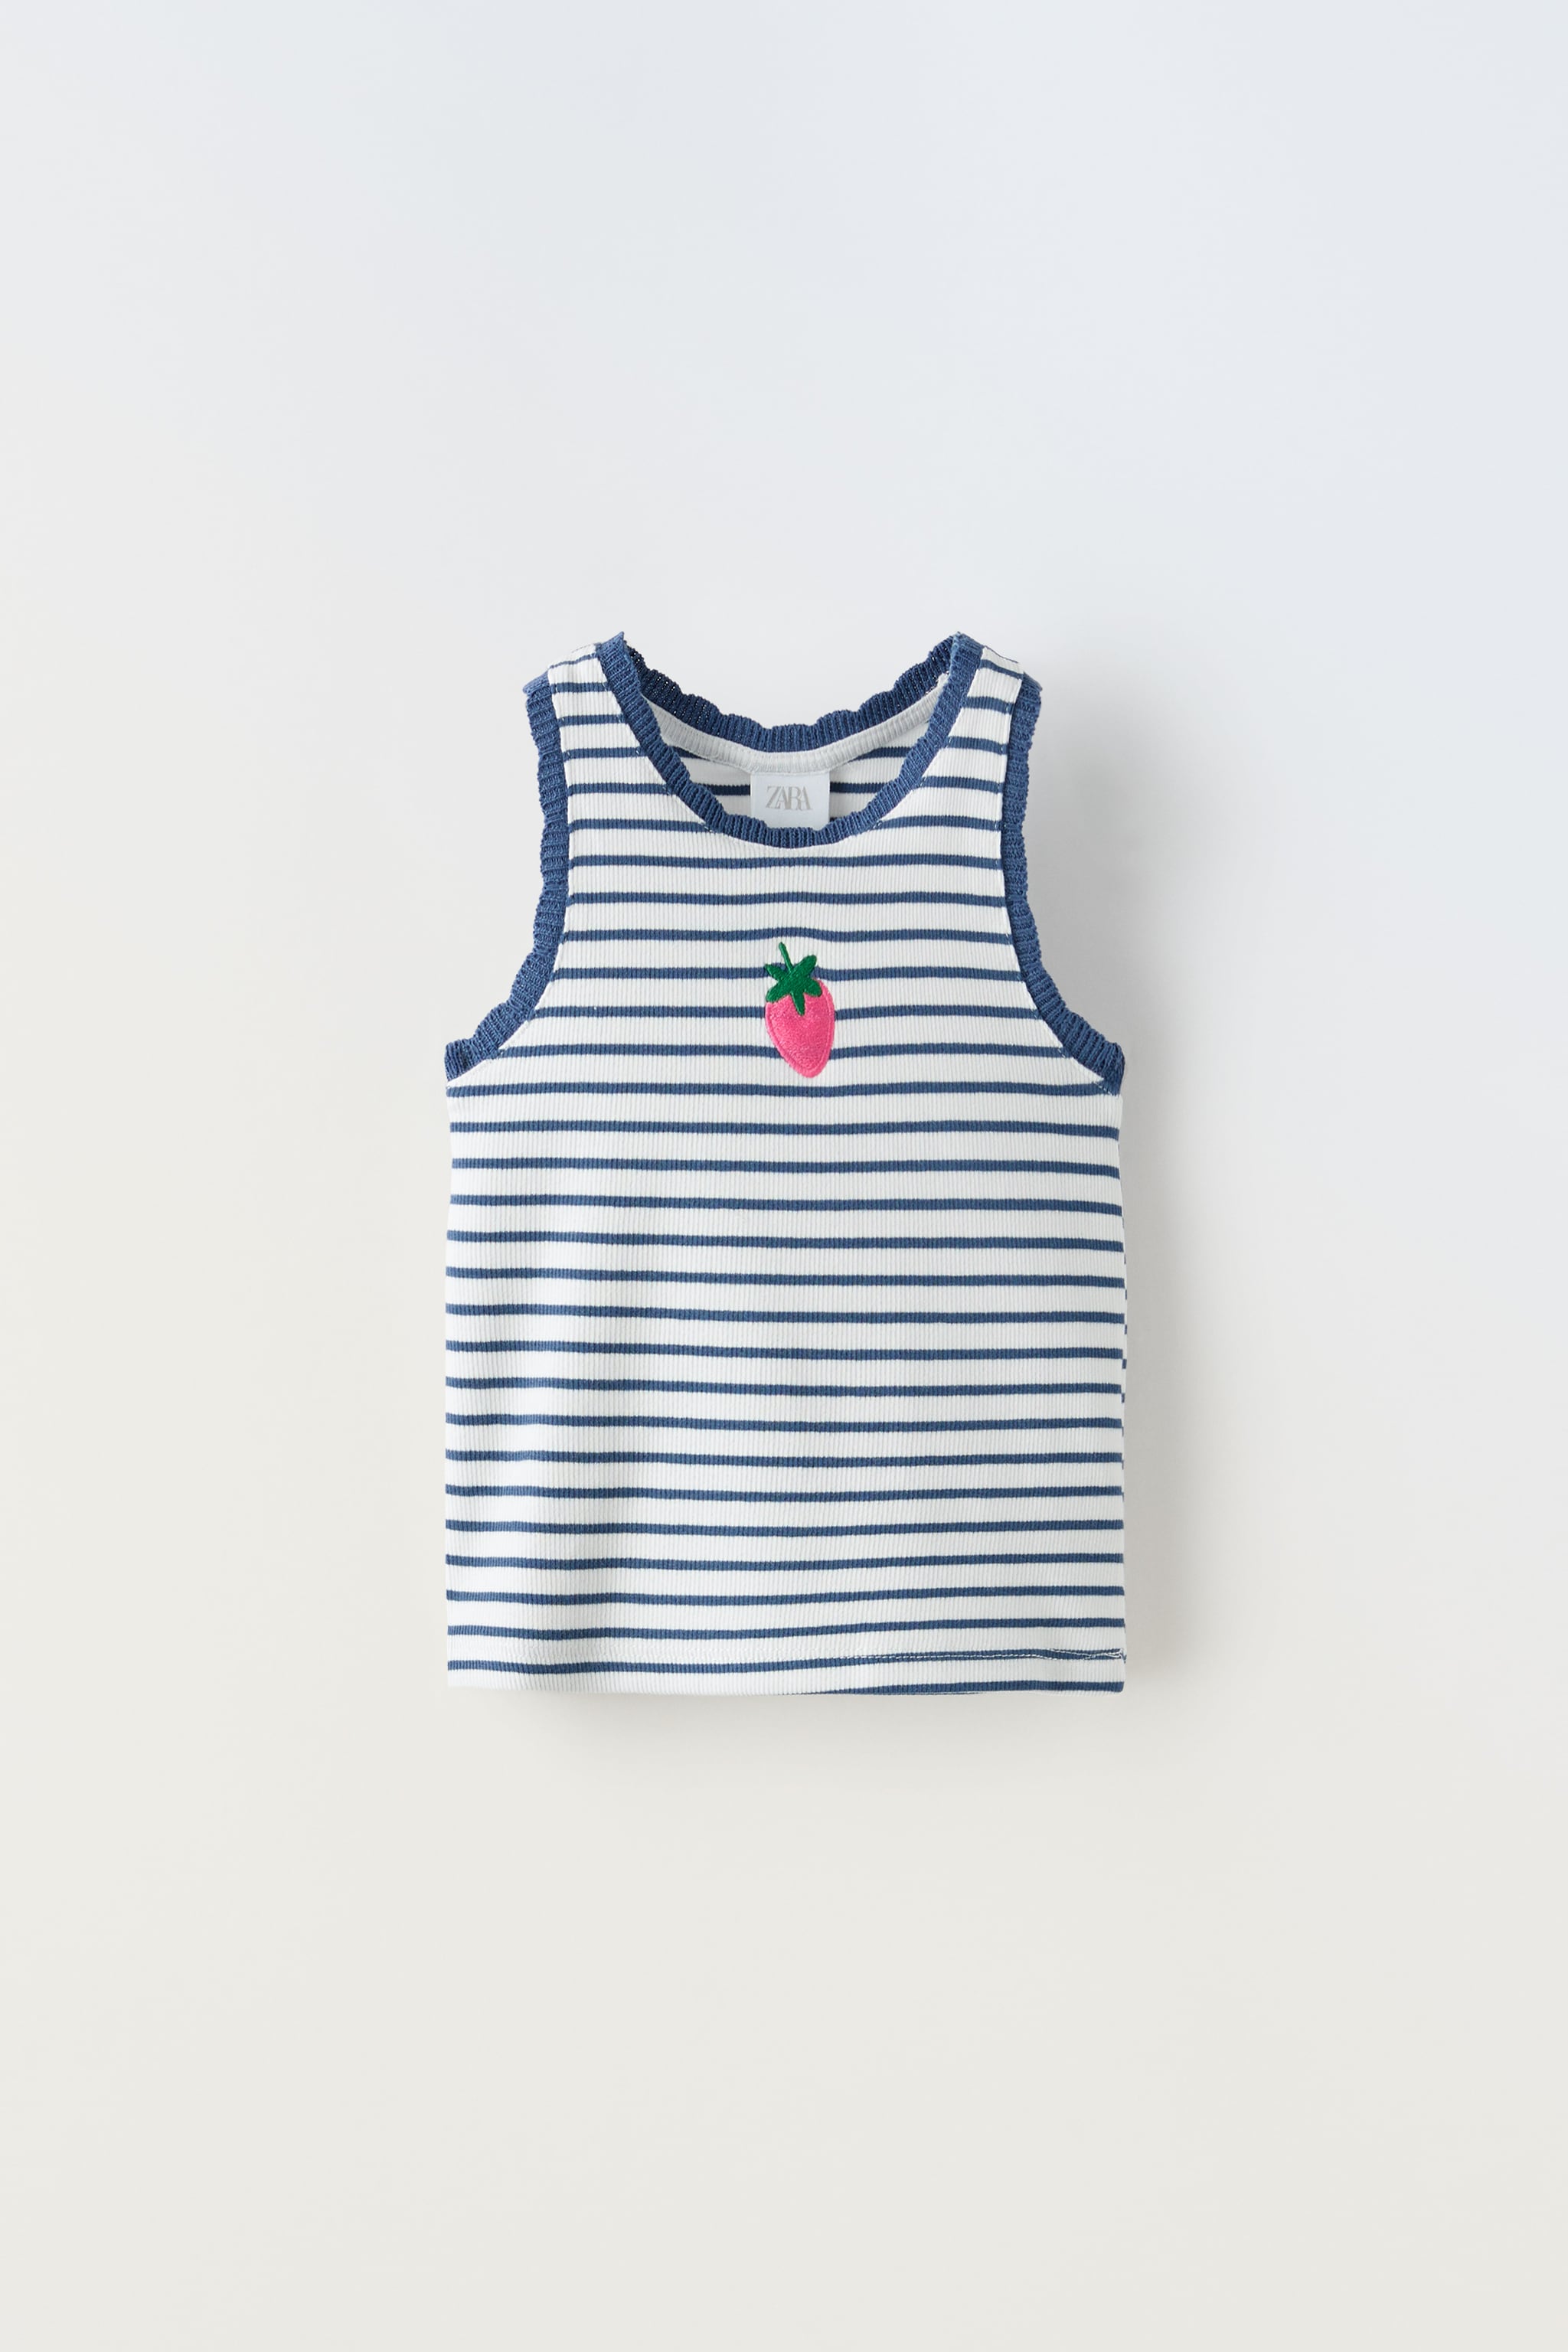 EMBROIDERED FRUIT RIB TANK TOP